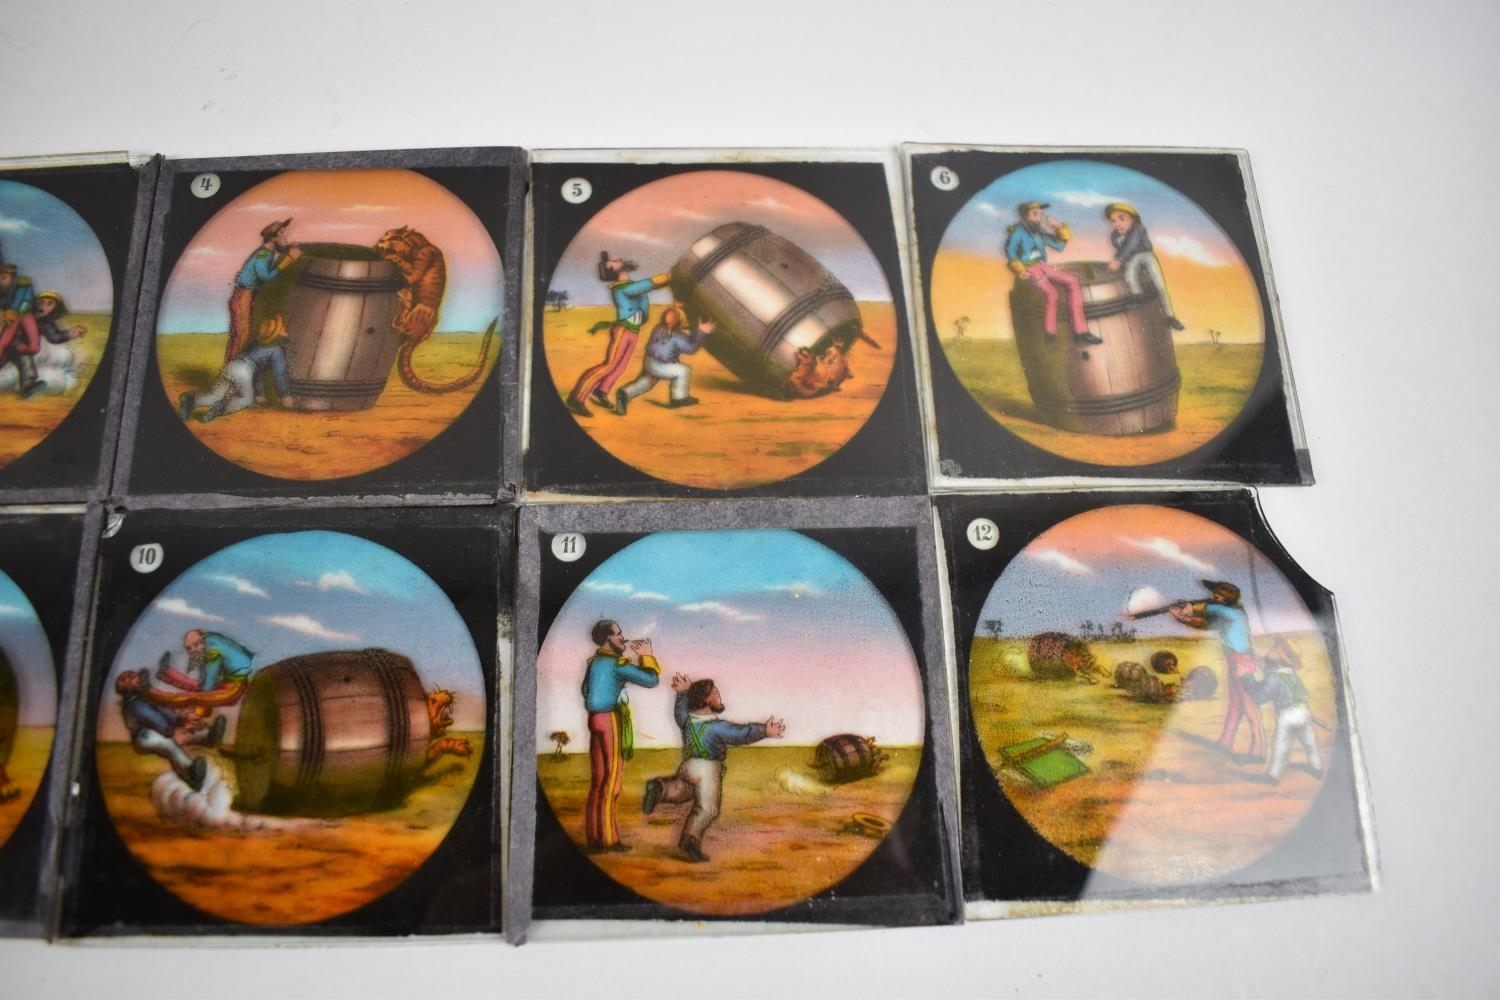 A Collection of 12 Coloured Magic Lantern Slides depicting Two Men Trying to Catch a Tiger in a - Image 3 of 3